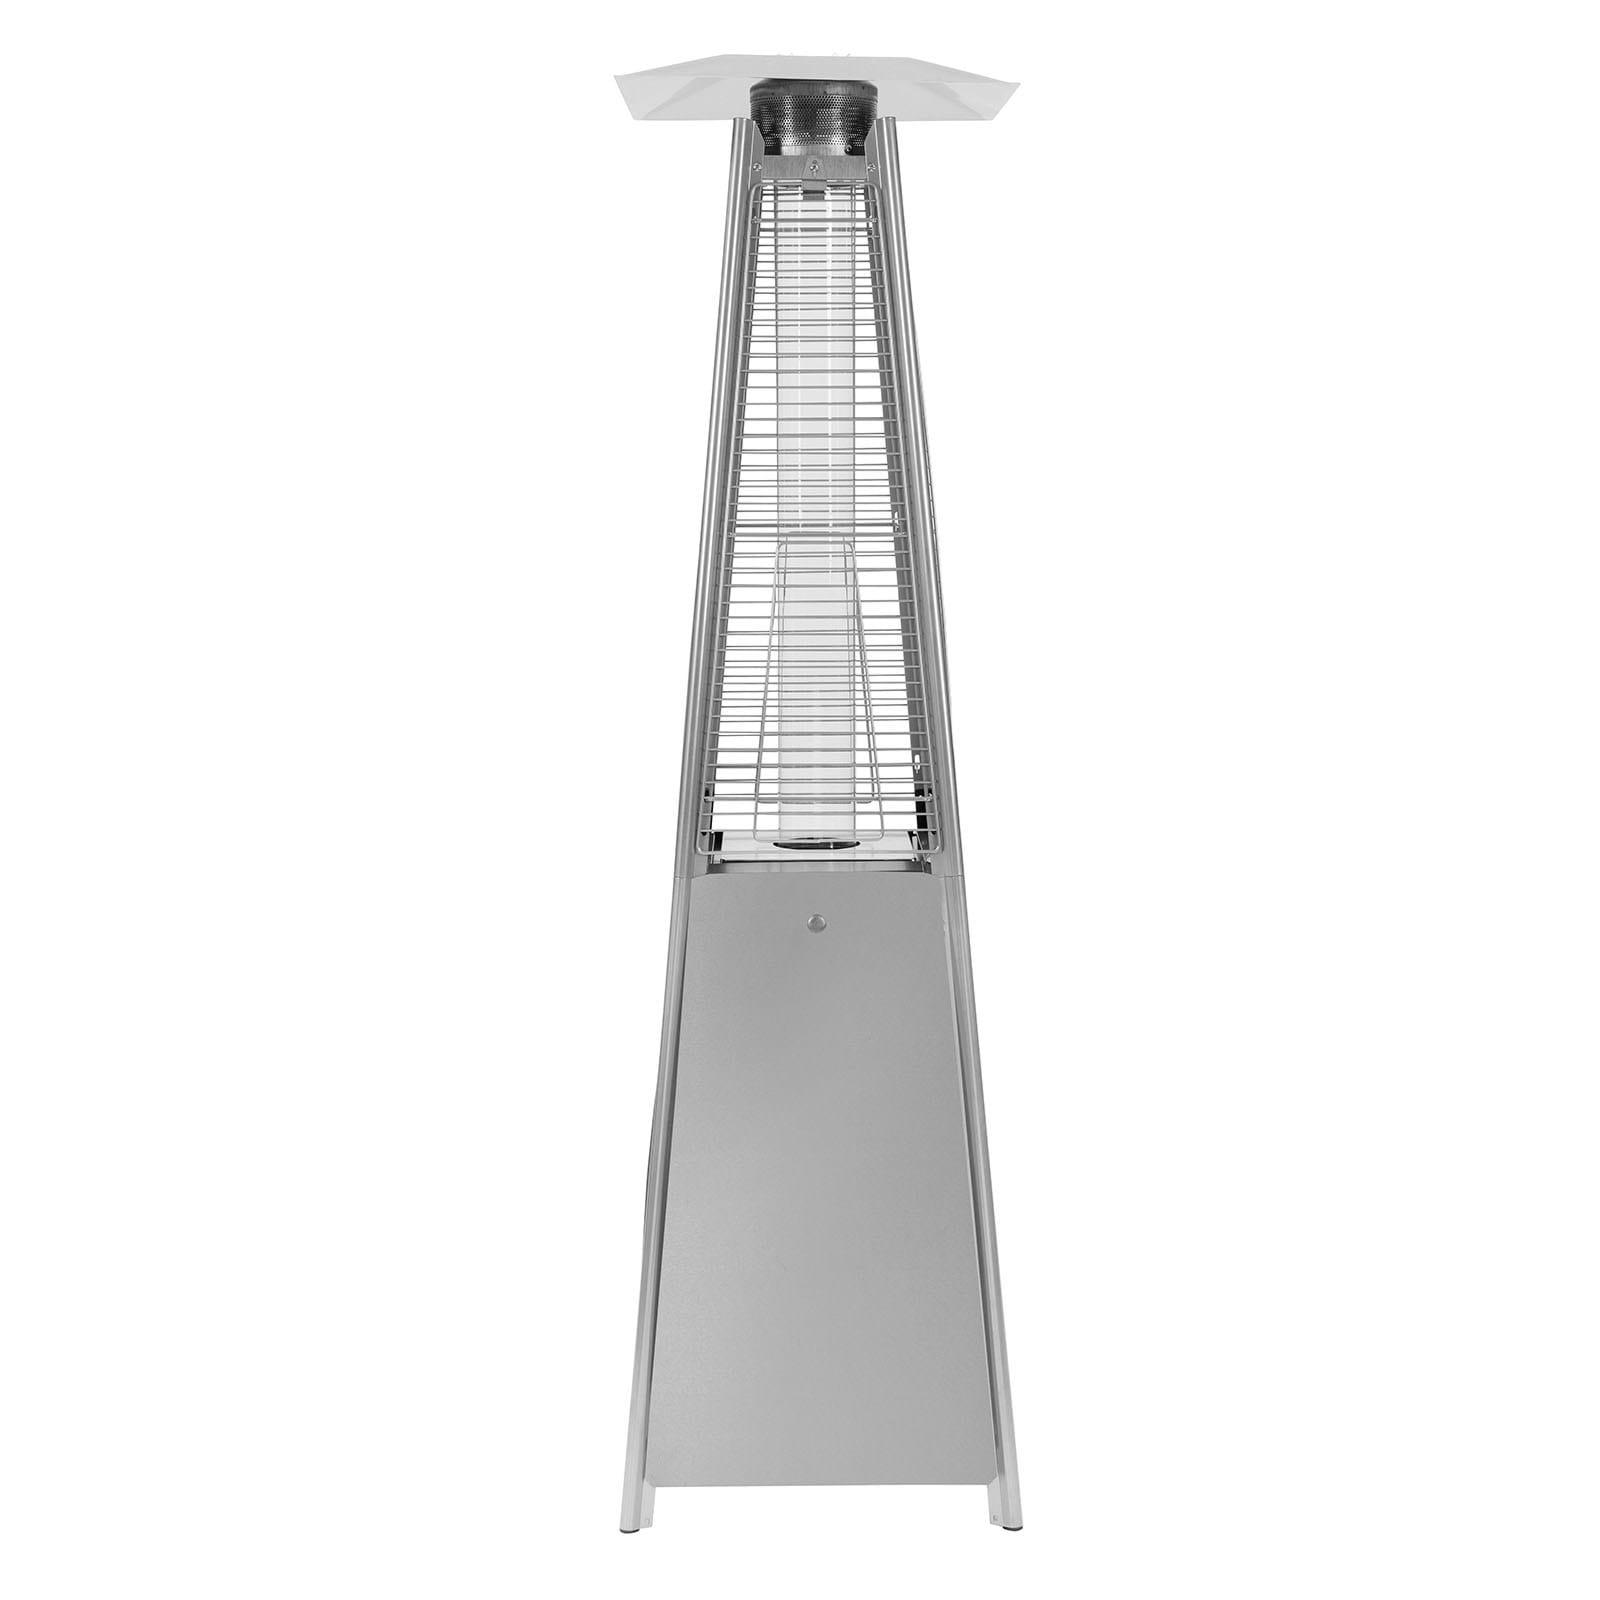 Gasmate Deluxe Stainless Steel Pyramid Flame Heater - Joe's BBQs